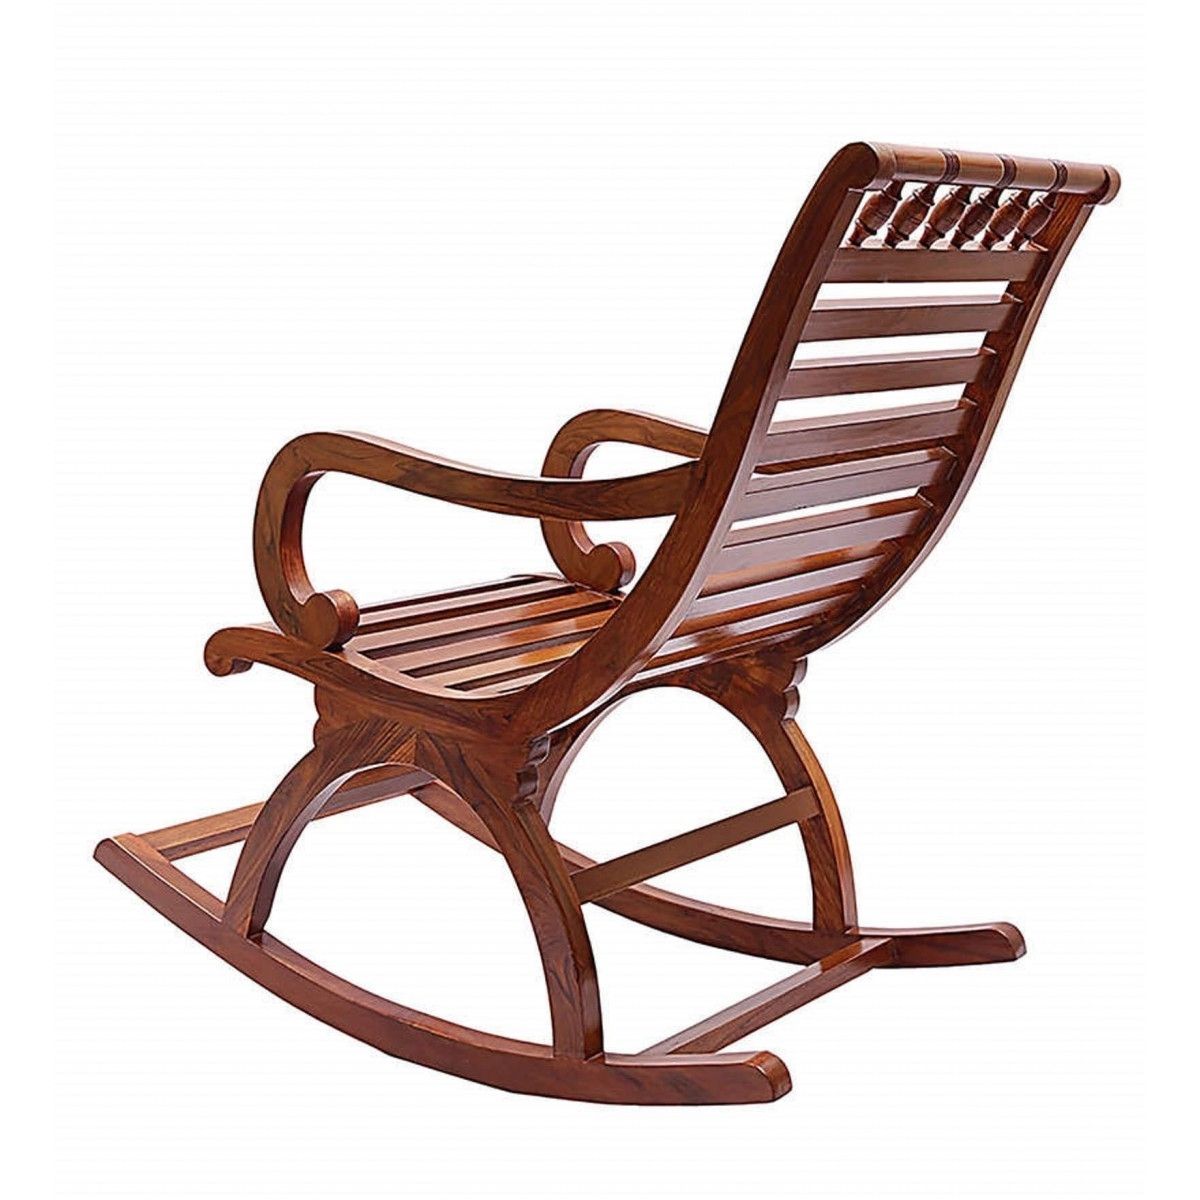 Widely Used Helms Arm Chairs With Rocking Chairs Online  Shop Wooden Rocking Chair At Here !! (Photo 11 of 20)